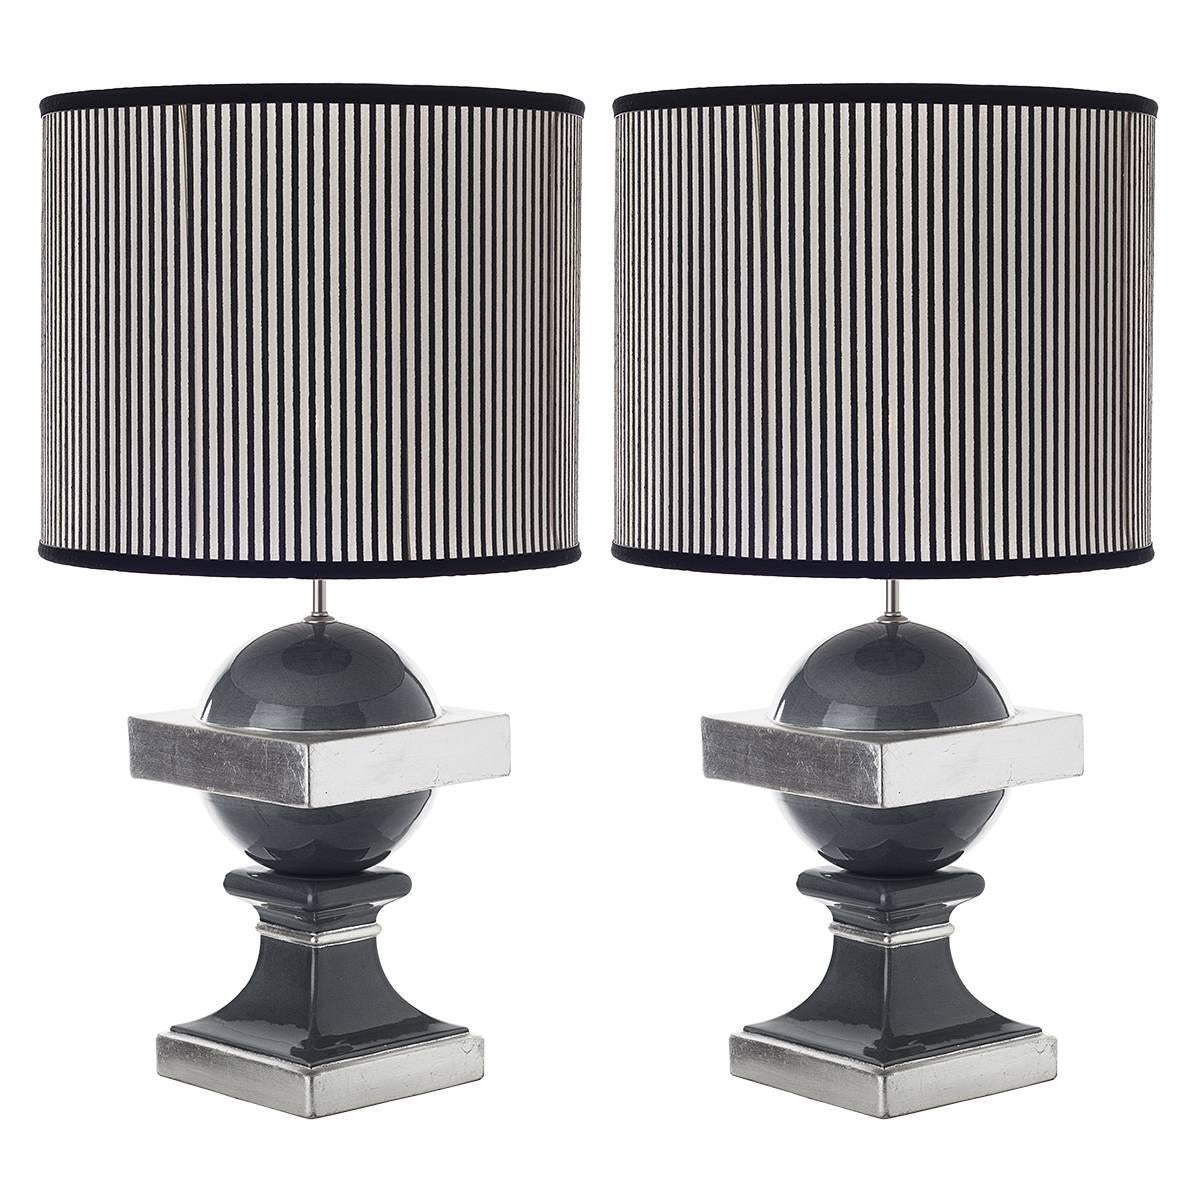 Pair of spherical transitional ceramic table lamps with shades.
These transitional table lamps show a contemporary finish, a crackle charcoal grey enriched by silver leaf details, on a more traditional lamp. The shades are lined, in a geometric,